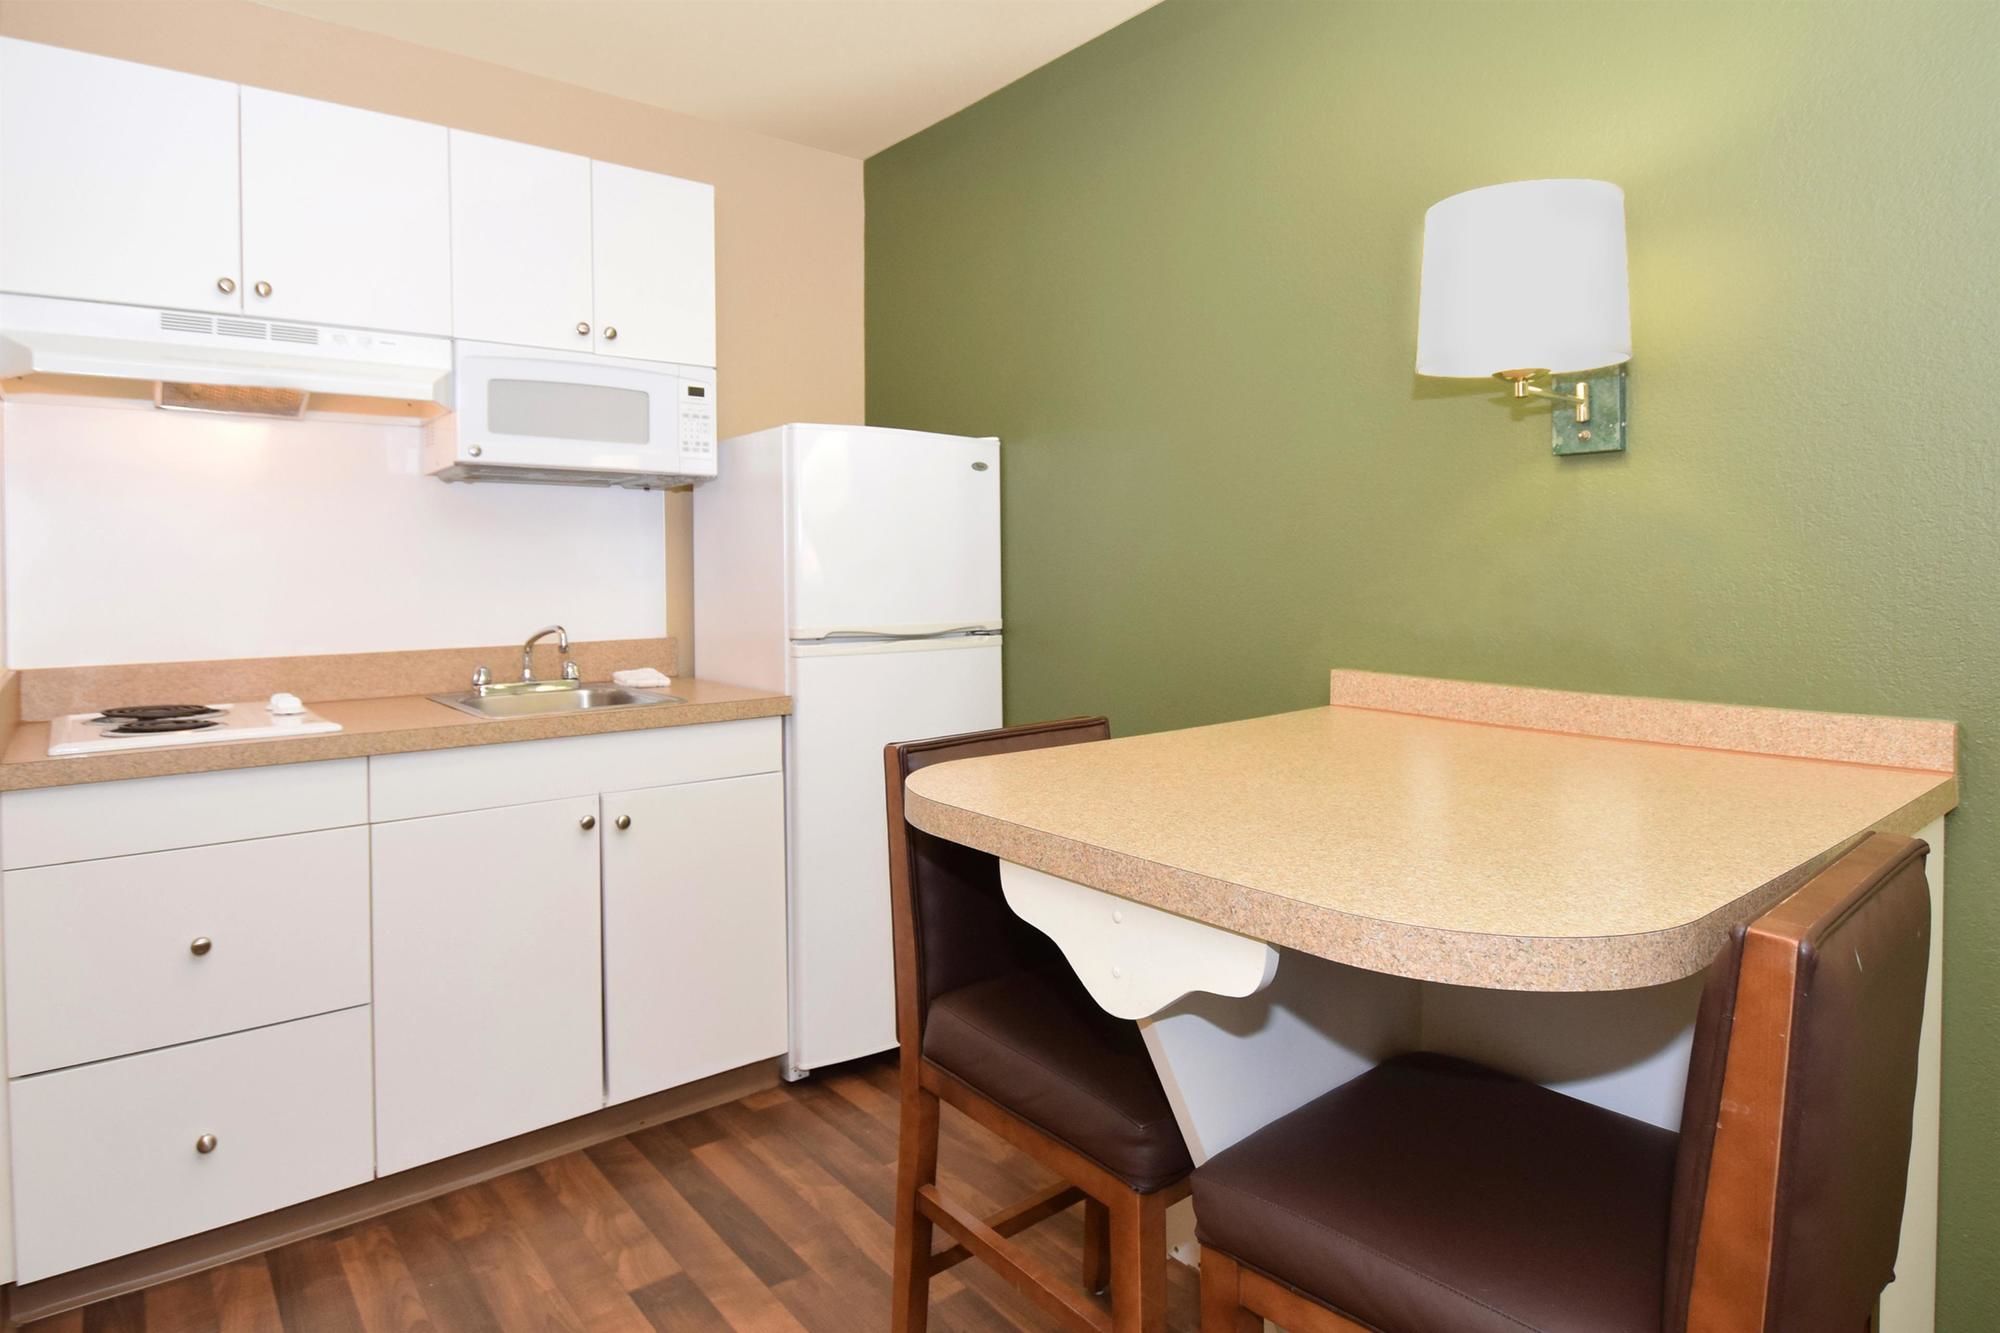 Extended Stay America San Jose Mountain View